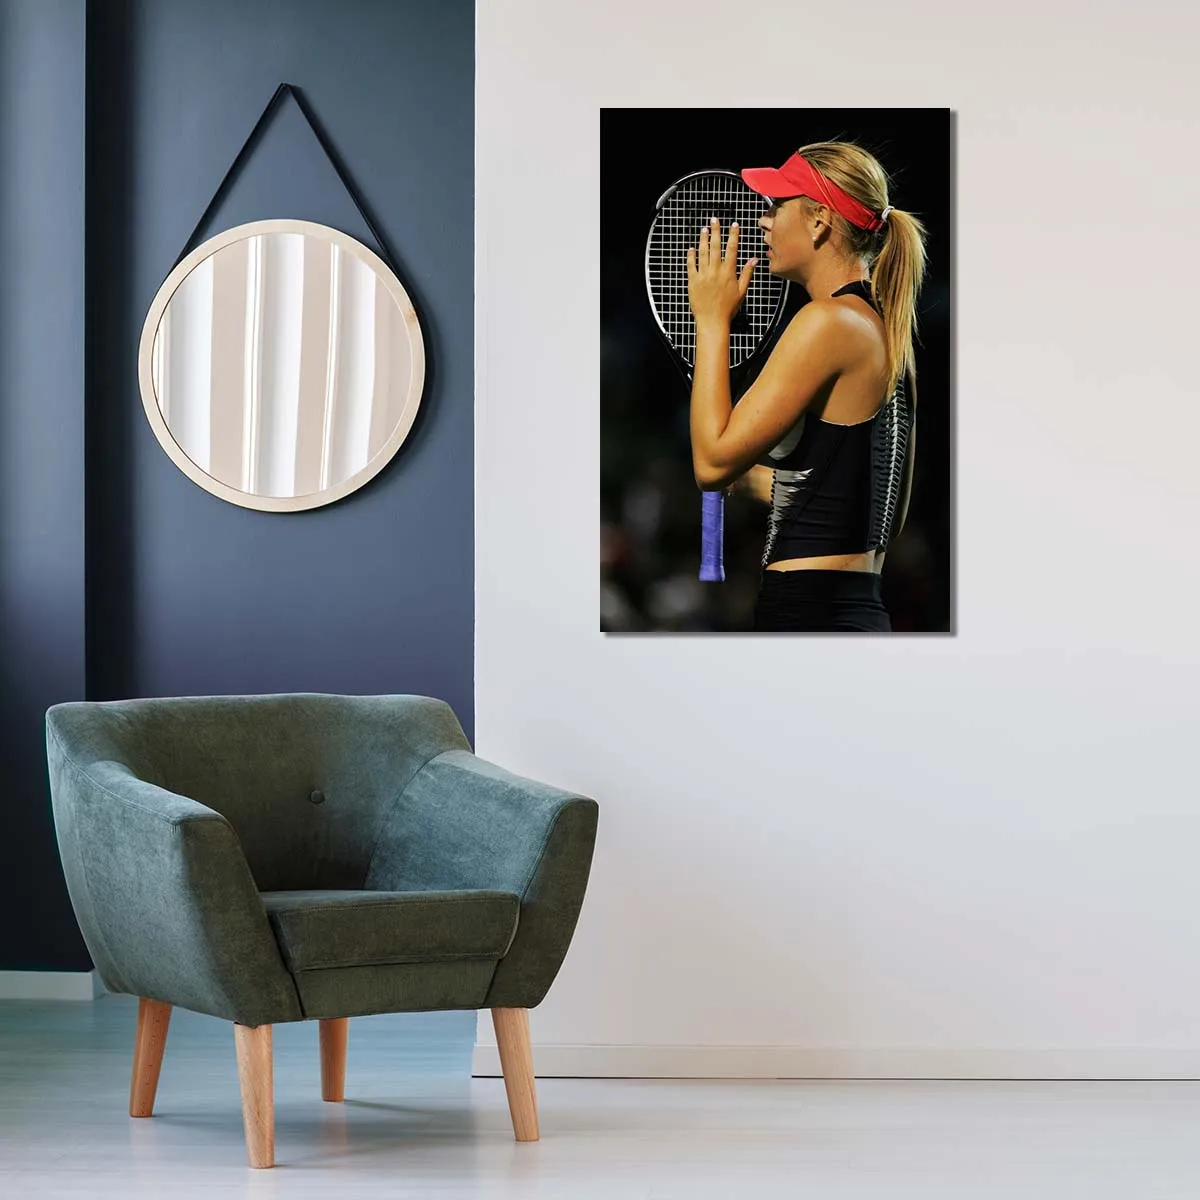 

Maria Sharapova Tennis Player Poster Decorative Picture Modern Wall Art Paintings Home Decor No Frame